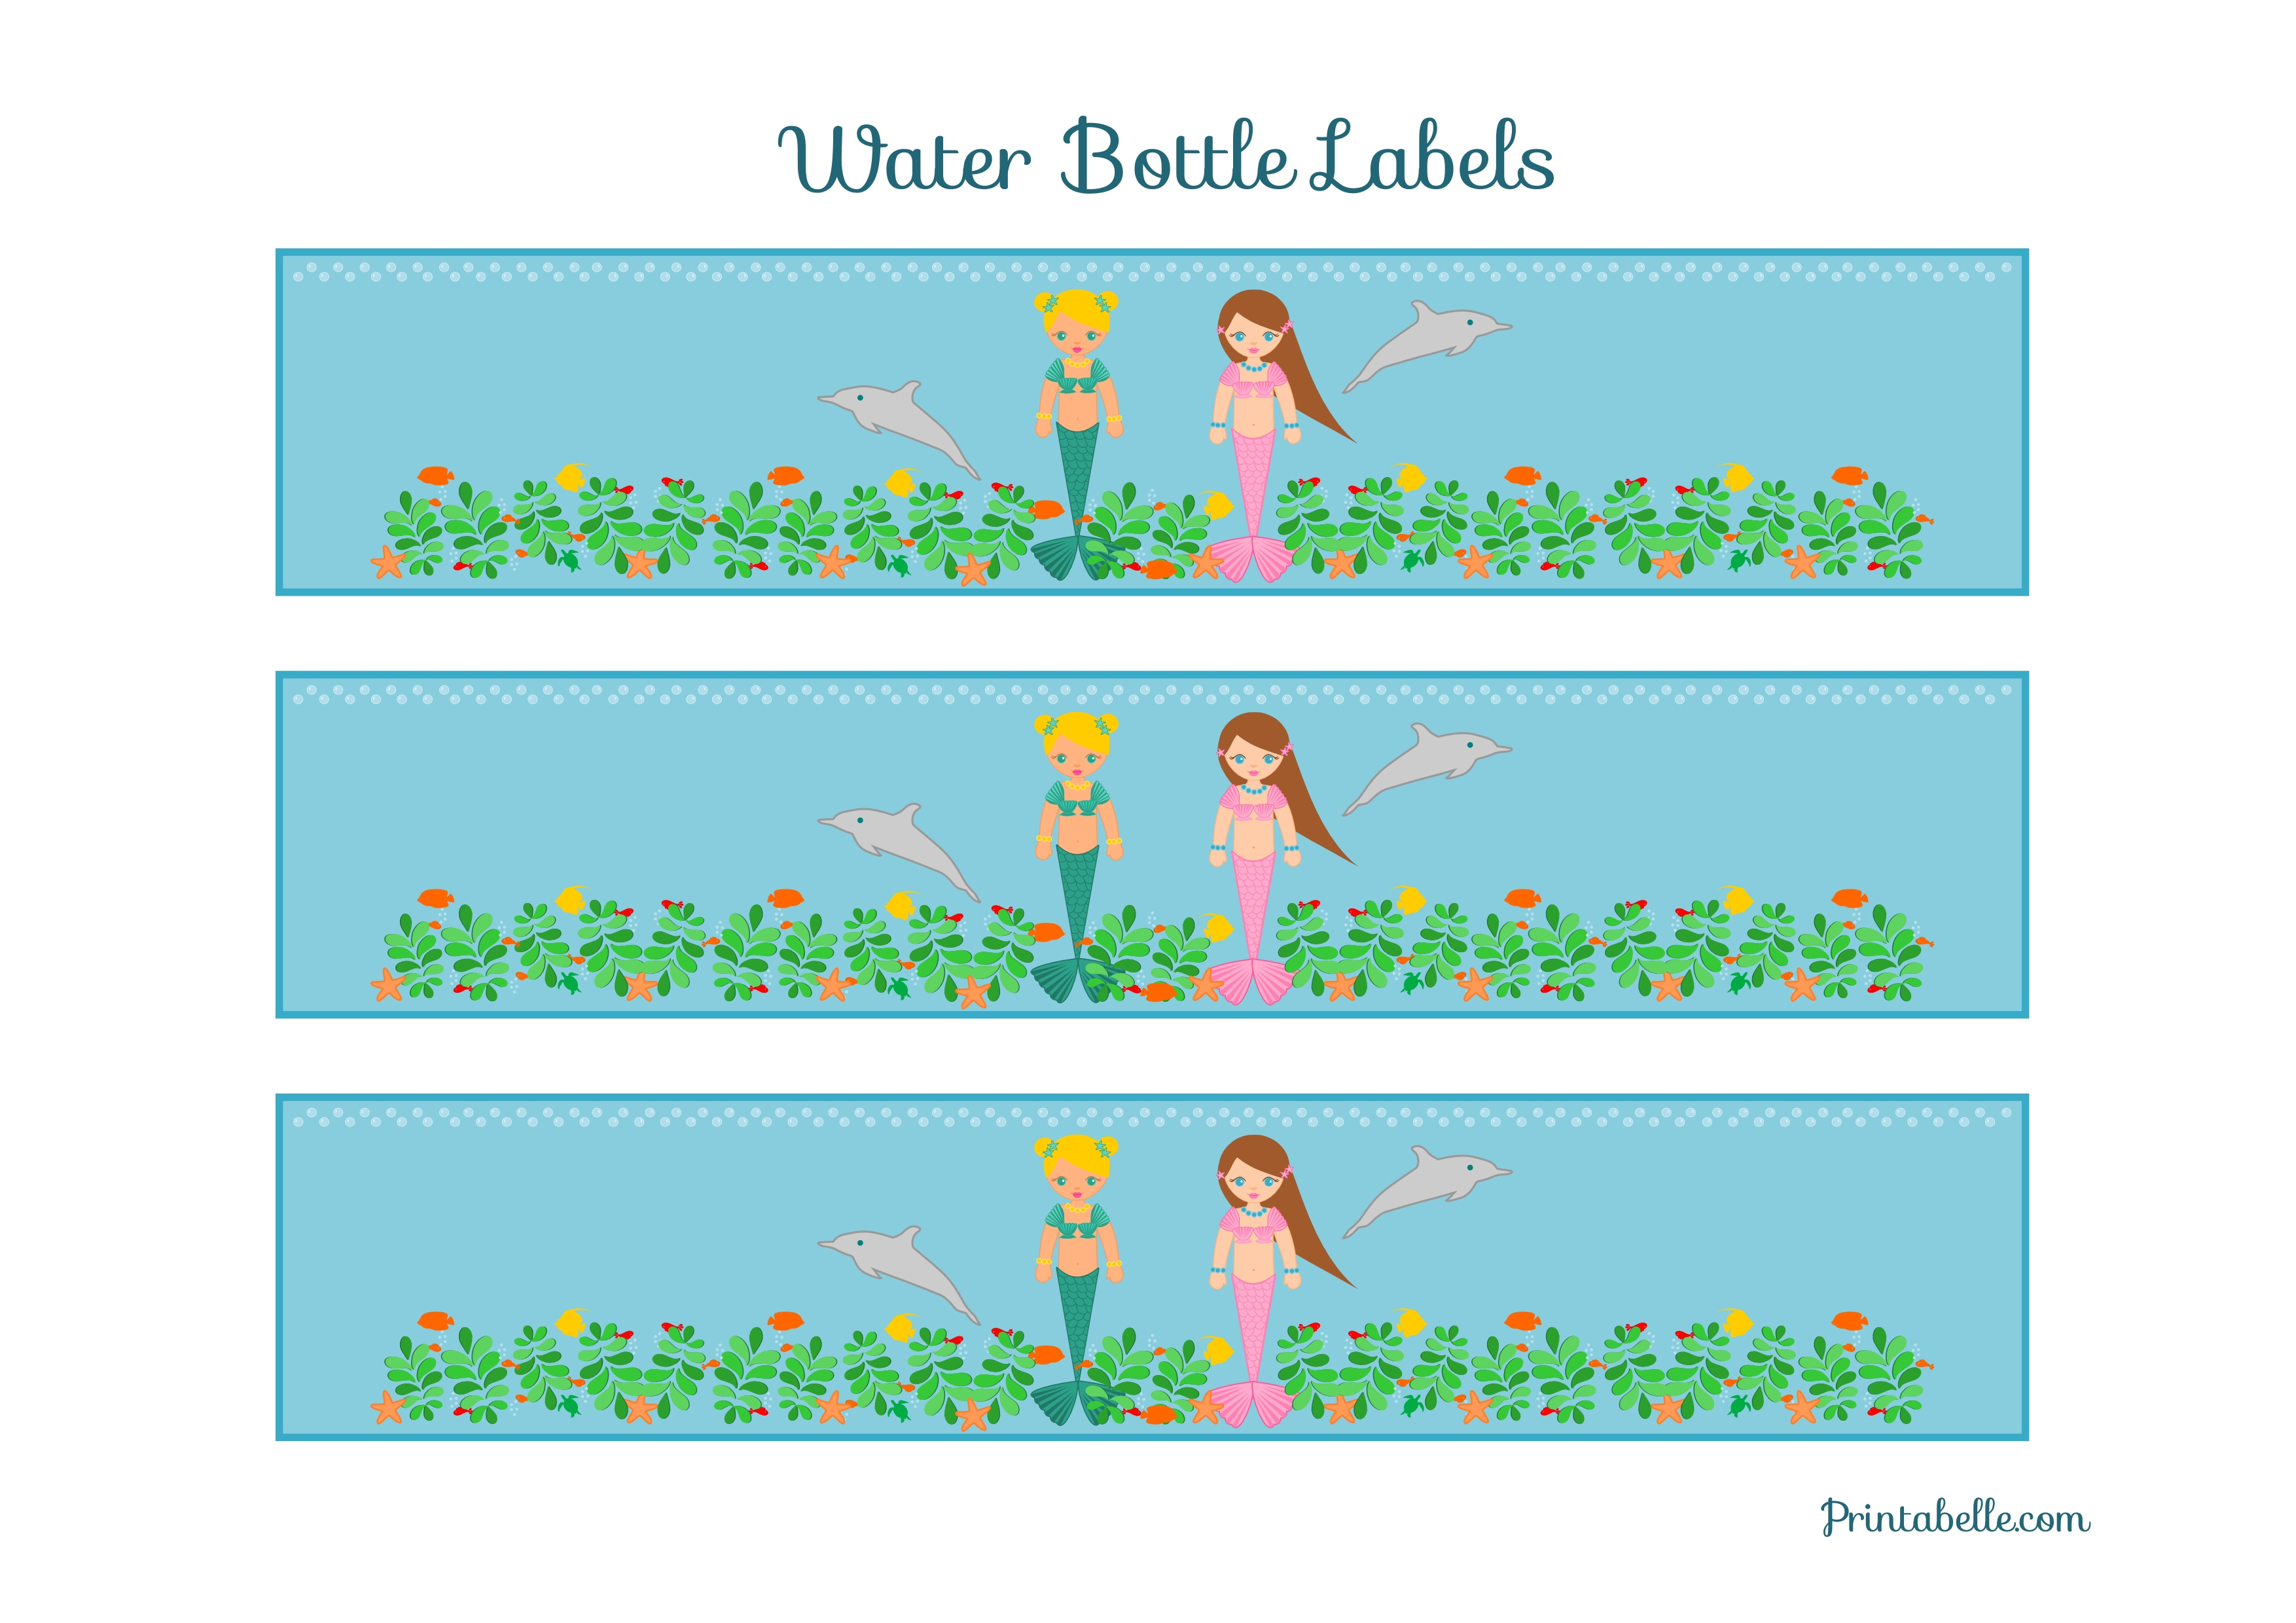 Free Mermaid Birthday Party Printables From Printabelle | Catch My Party - Free Printable Little Mermaid Water Bottle Labels